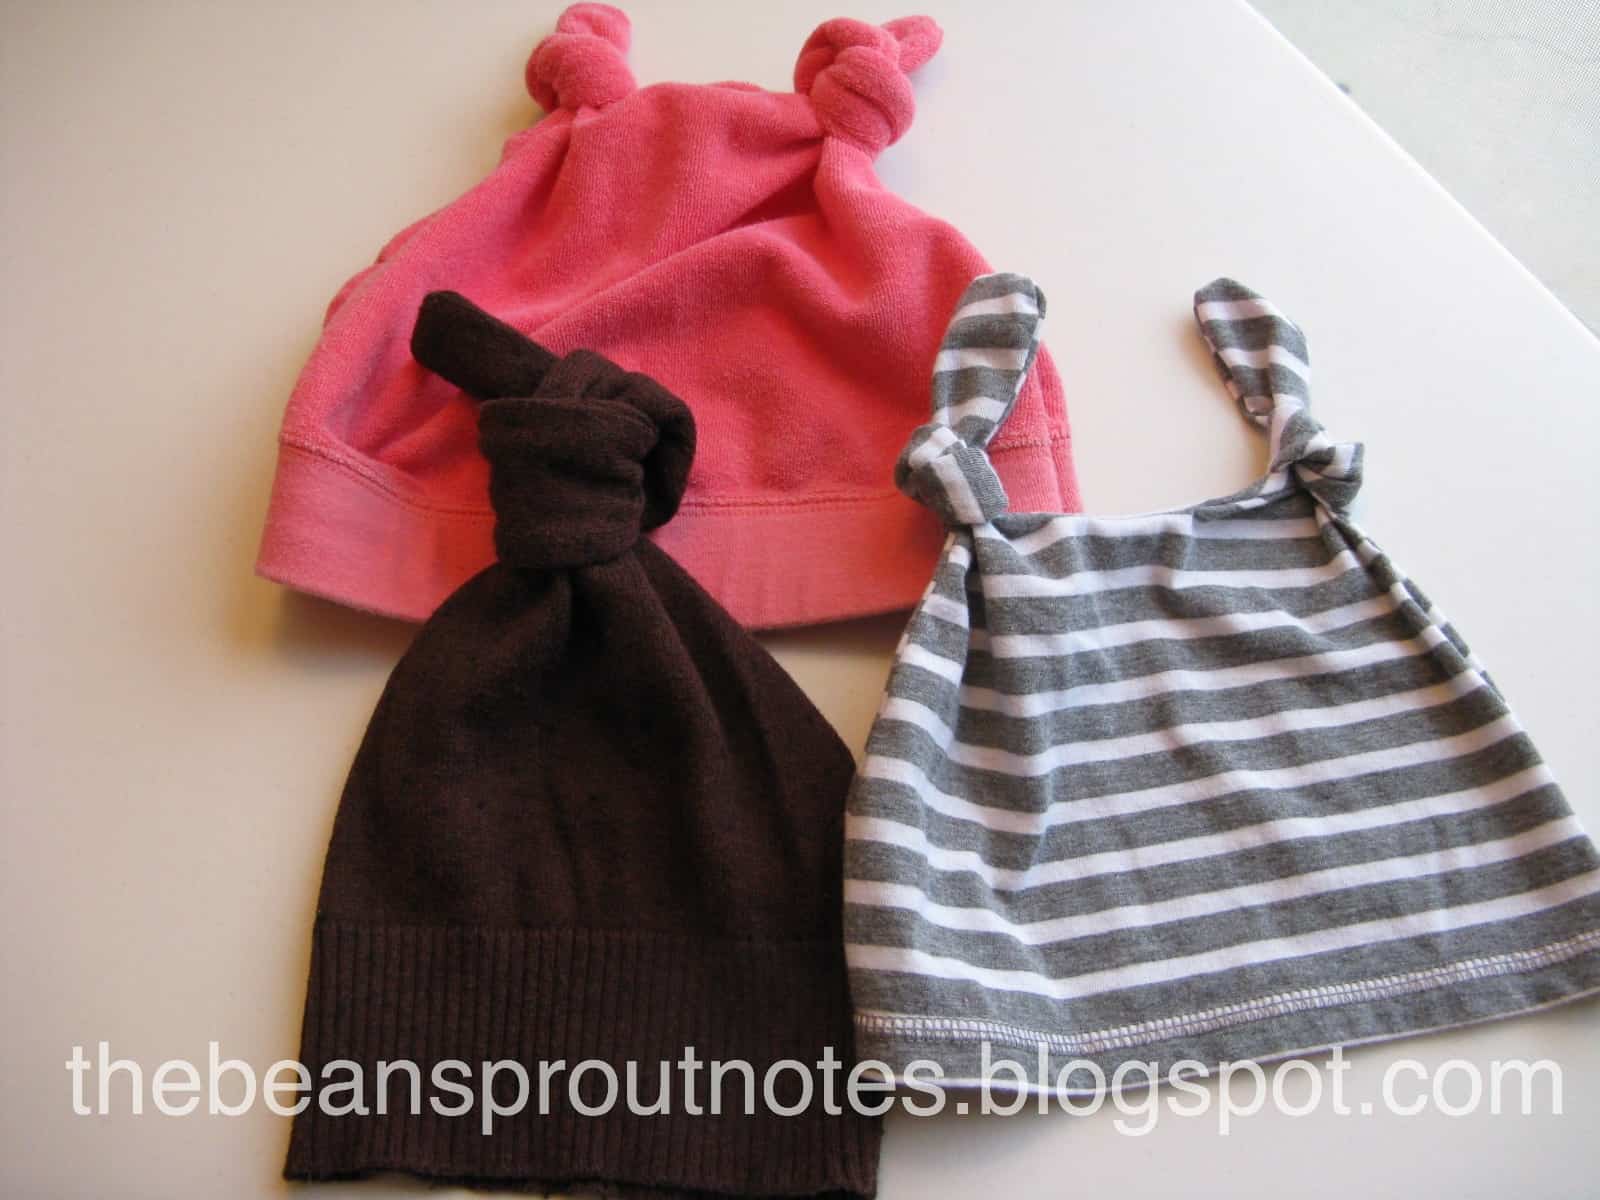 Old shirts to baby pigtail hats